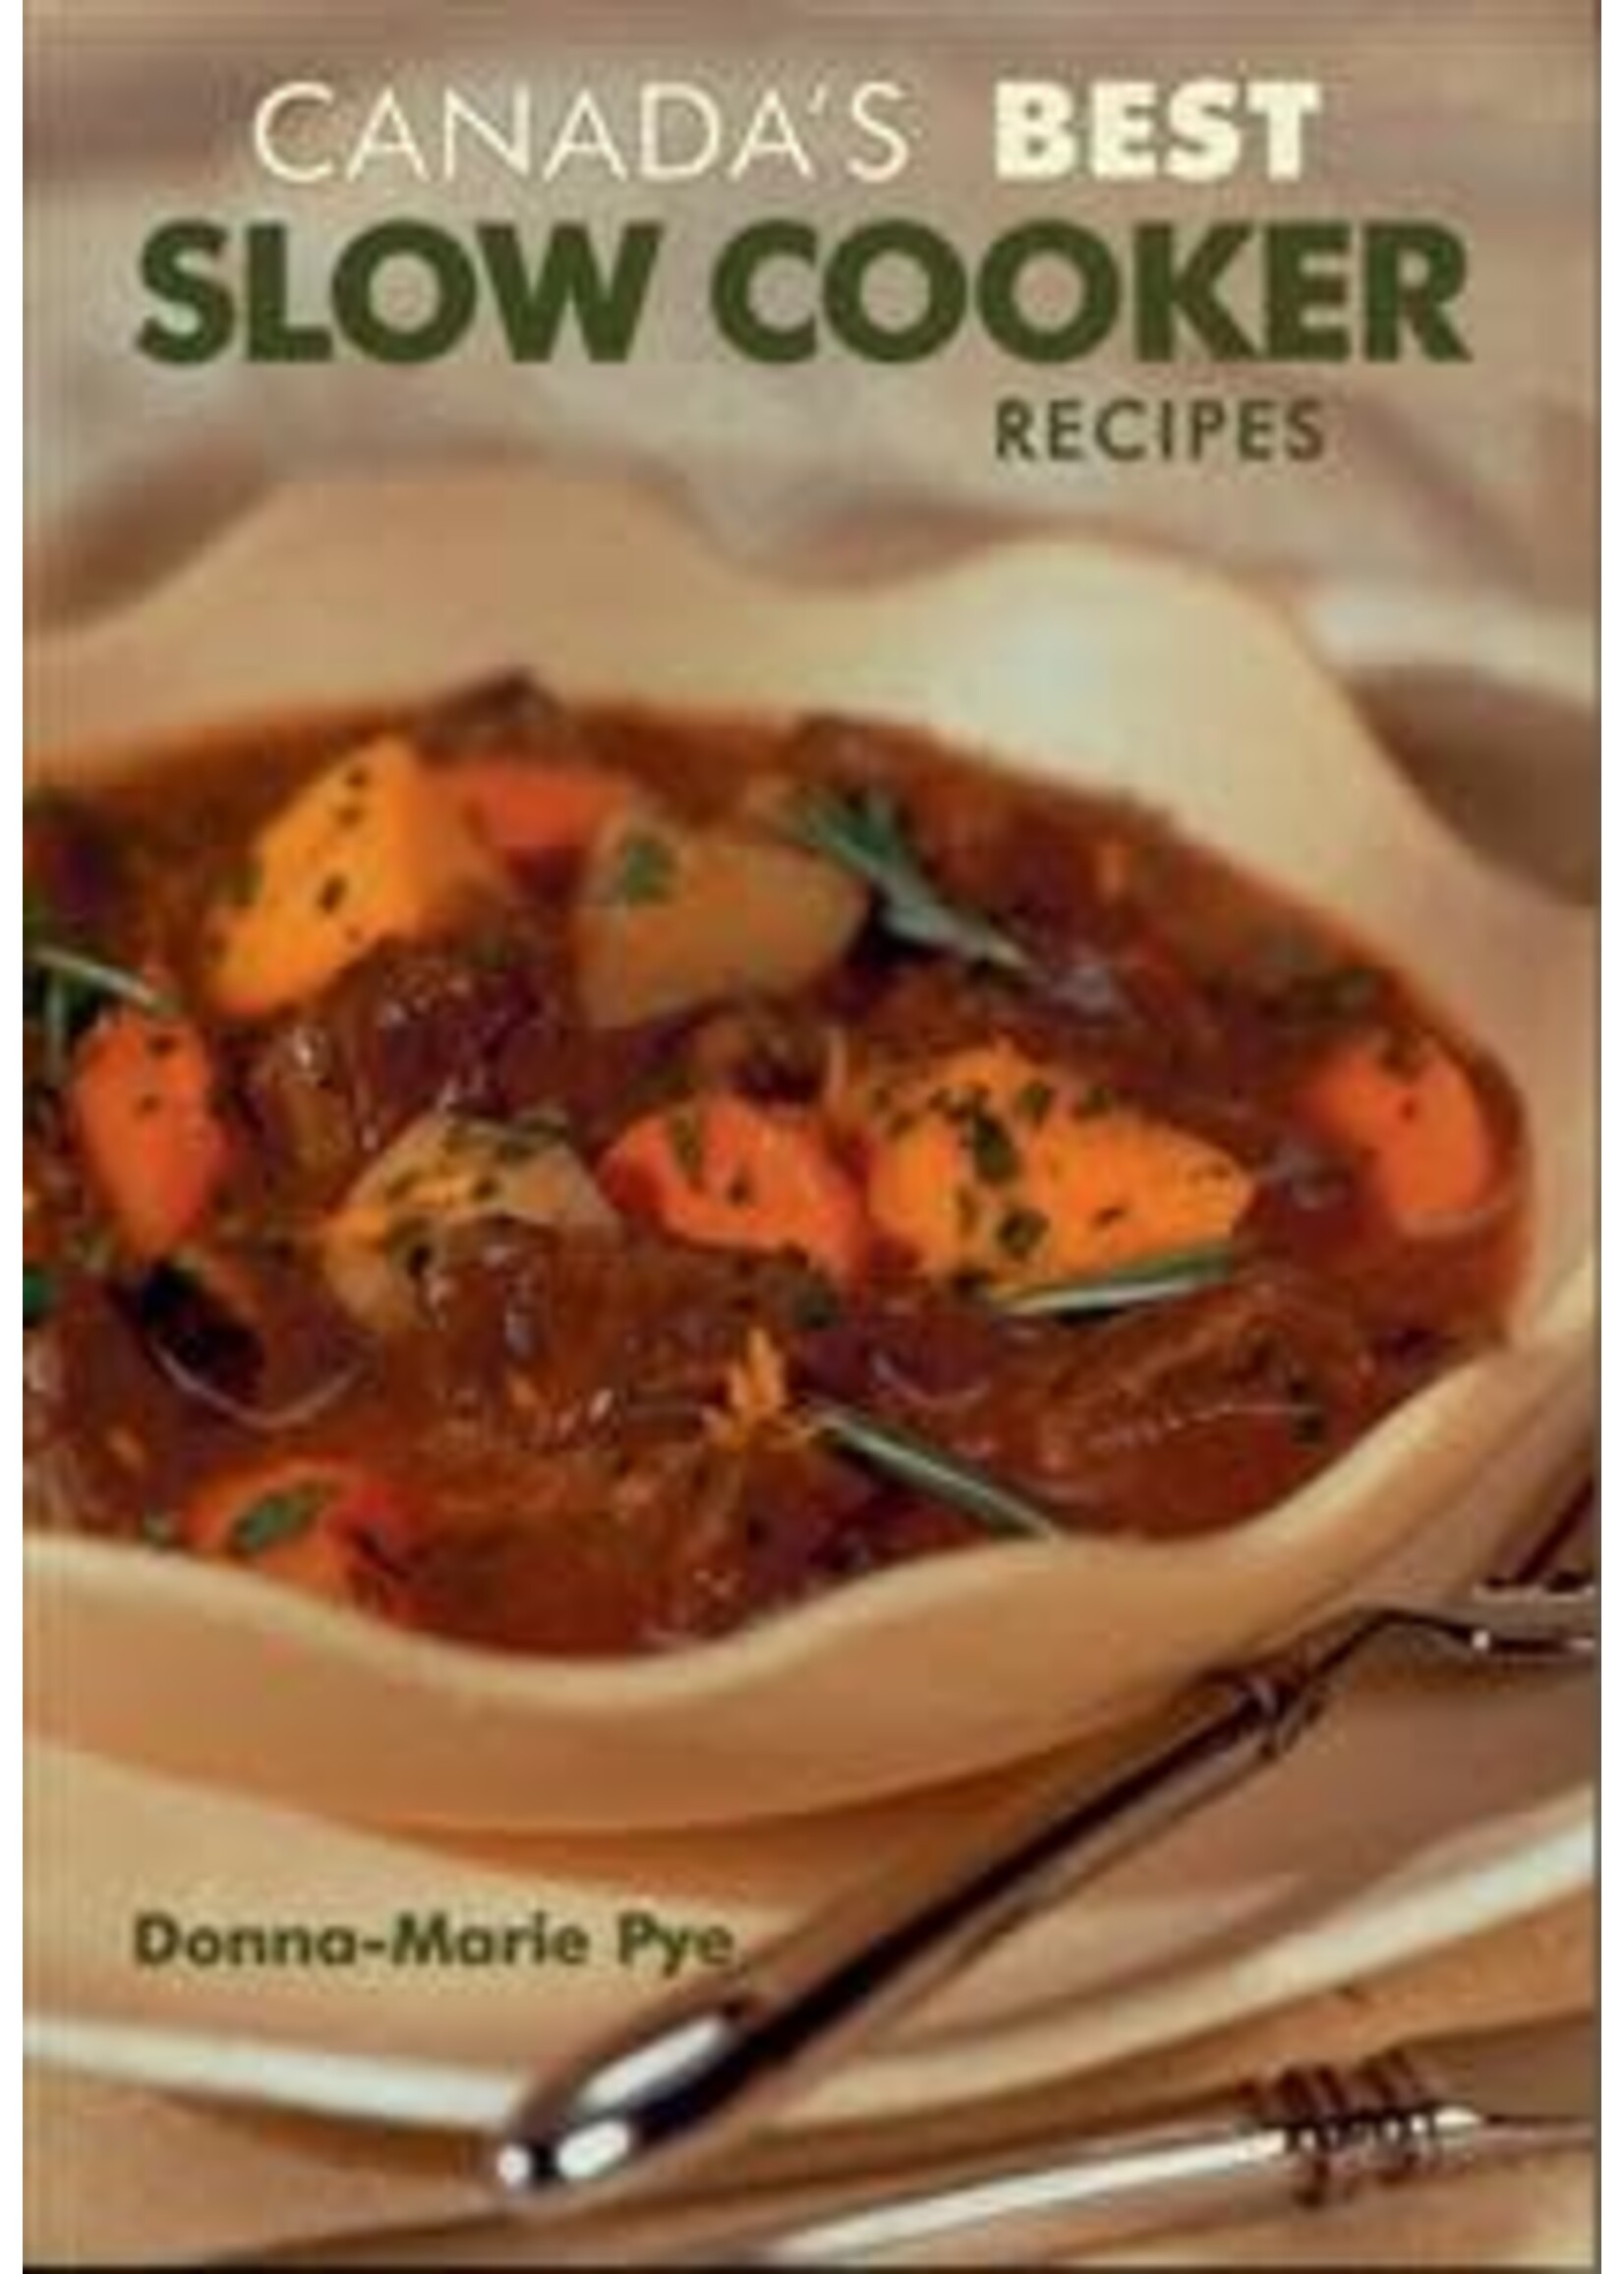 Canada's Best Slow Cooker Recipes by Donna-Marie Pye